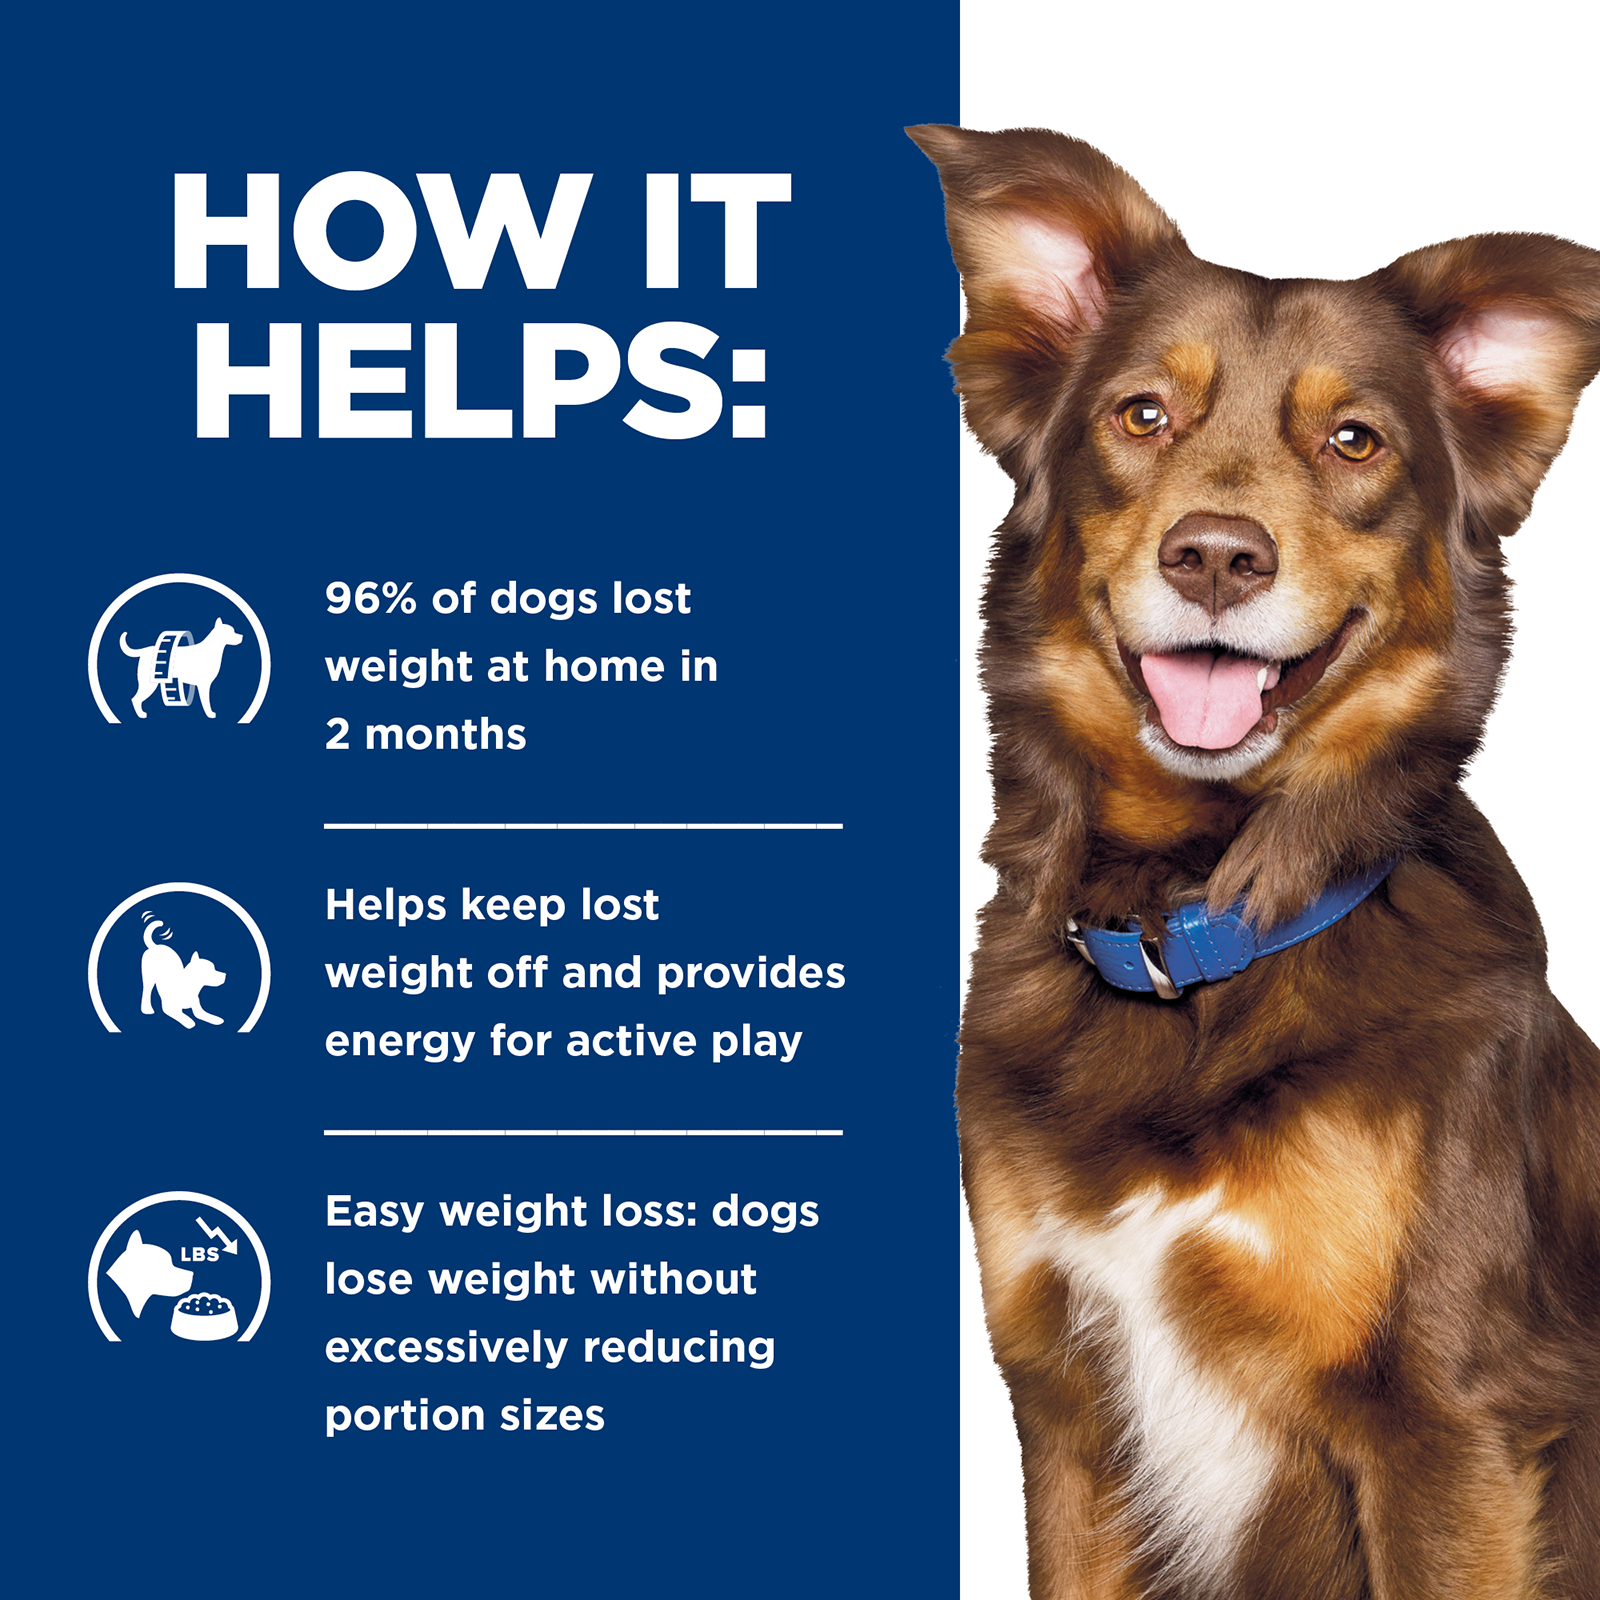 Hill's Prescription Diet Dog Food Can Metabolic Weight Loss & Maintenance